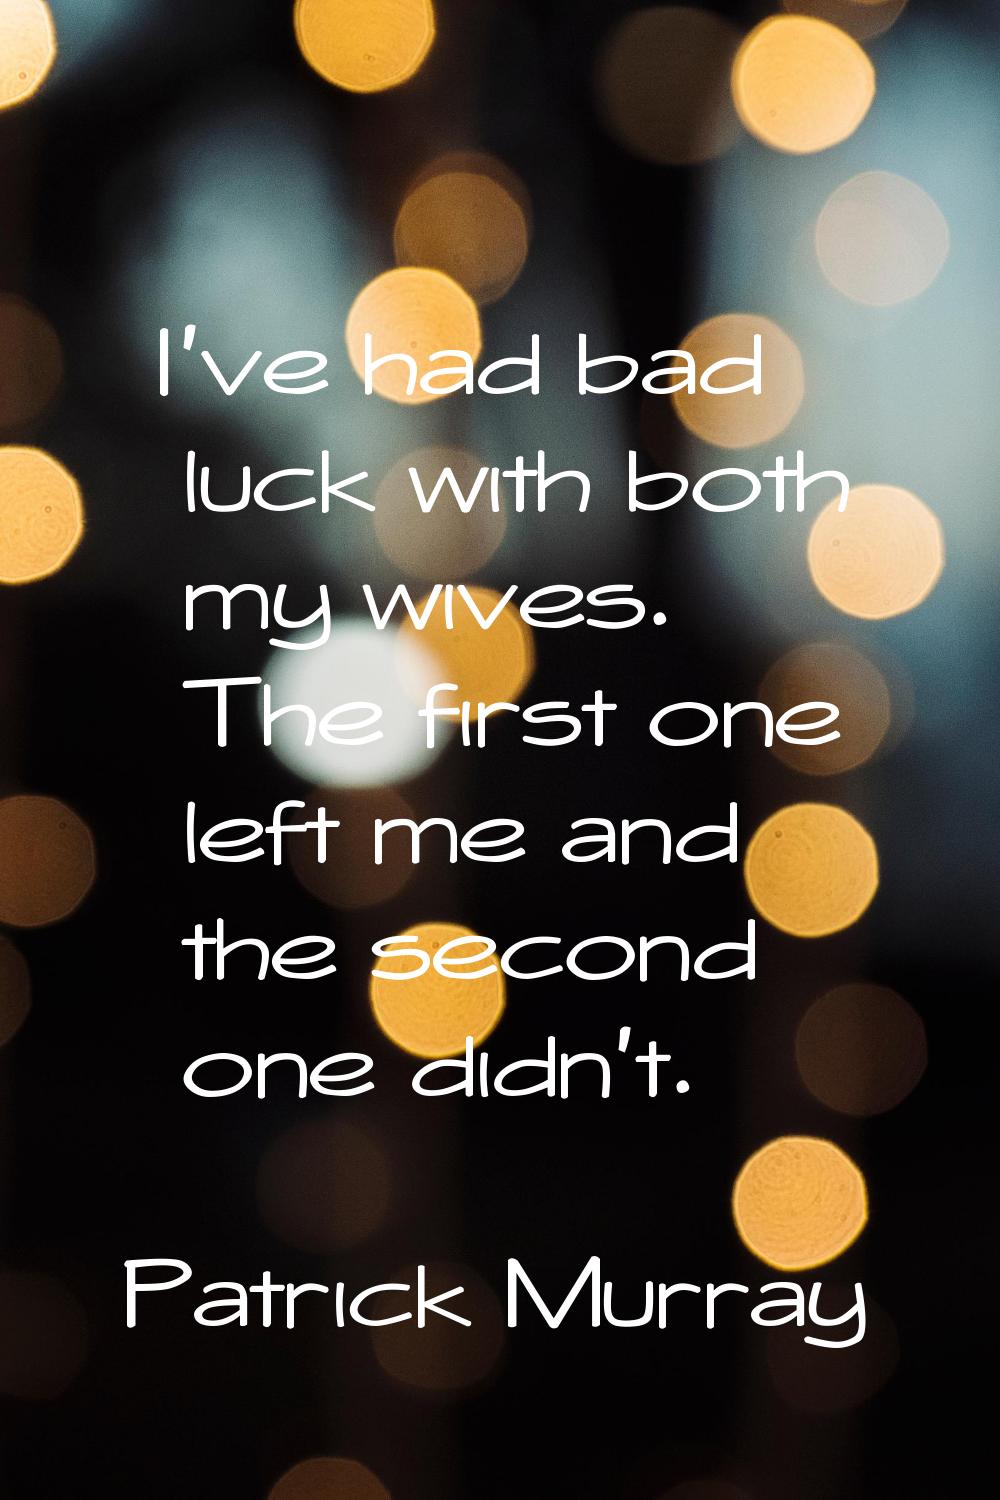 I've had bad luck with both my wives. The first one left me and the second one didn't.